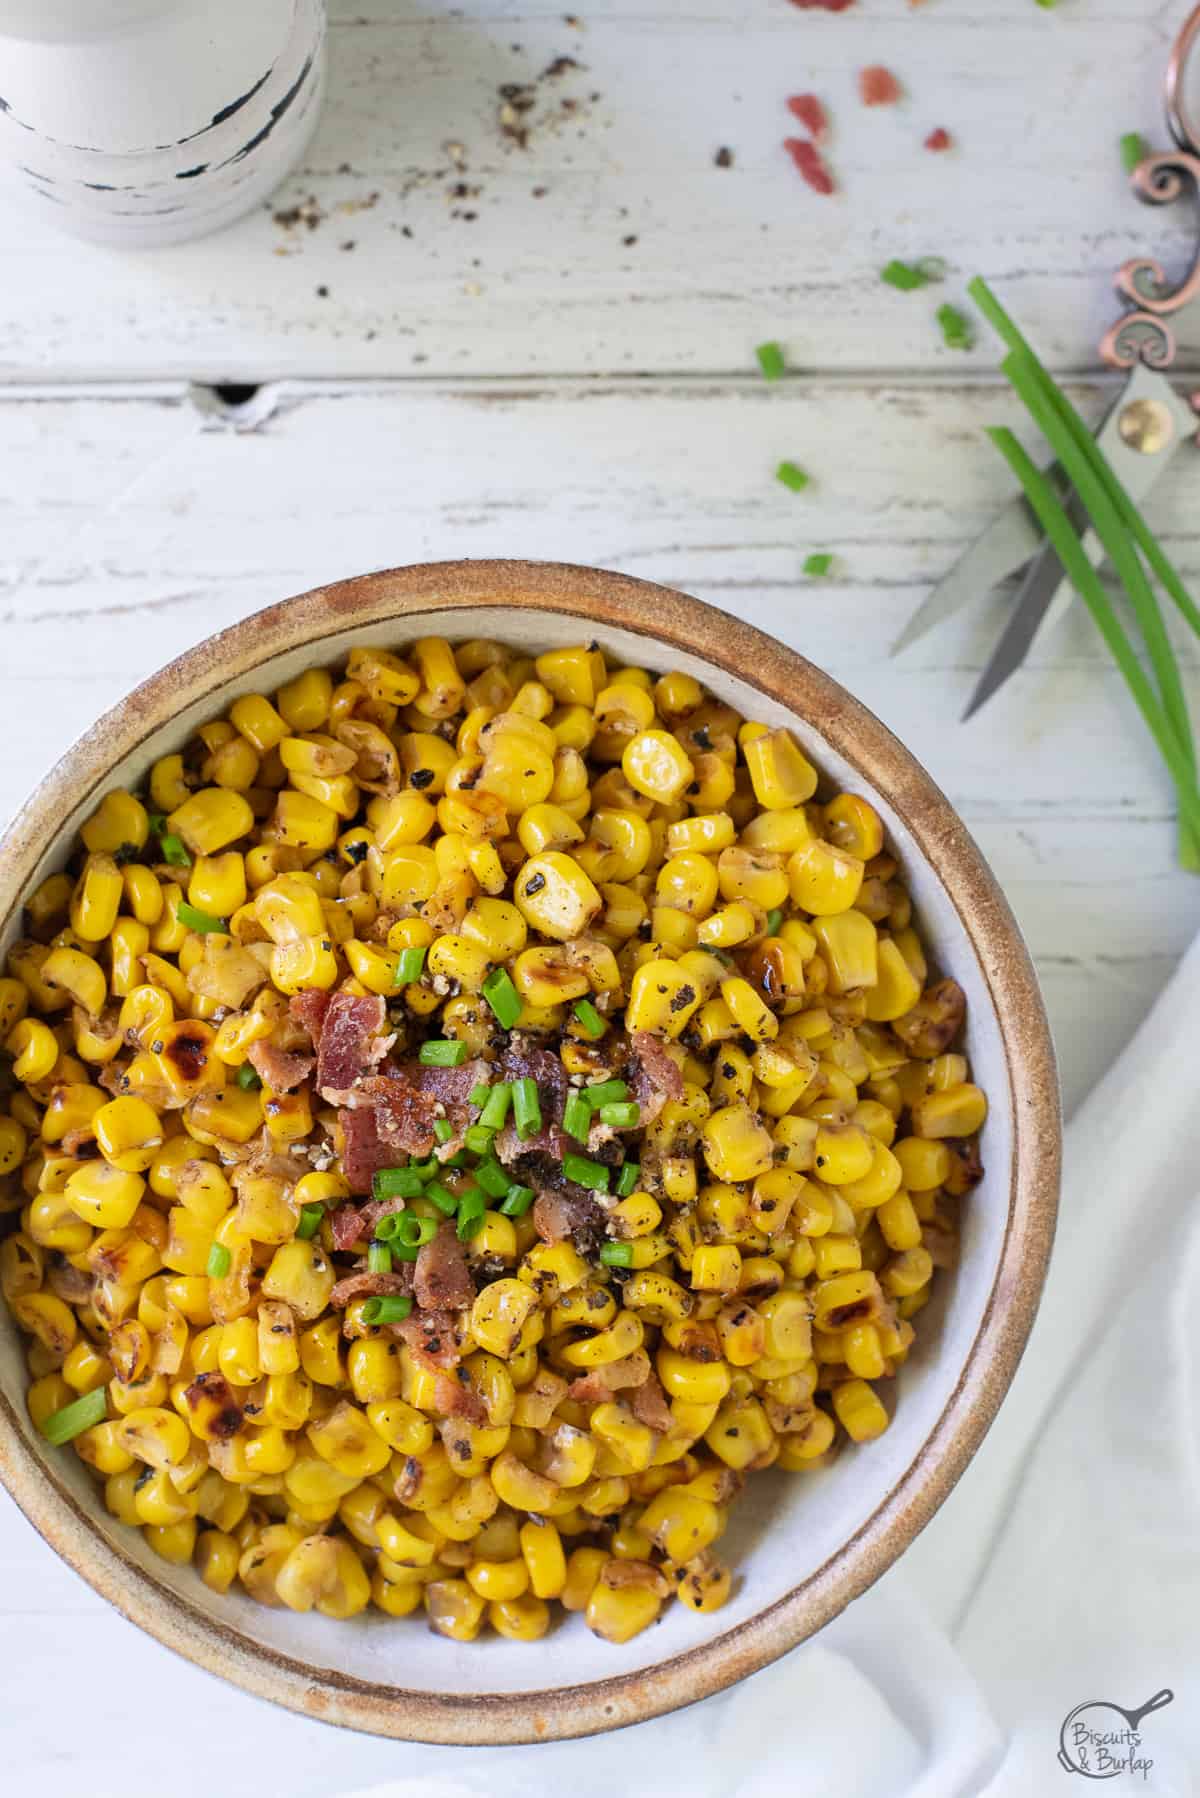 bowl of blackened (charred) corn with shears cutting chives.